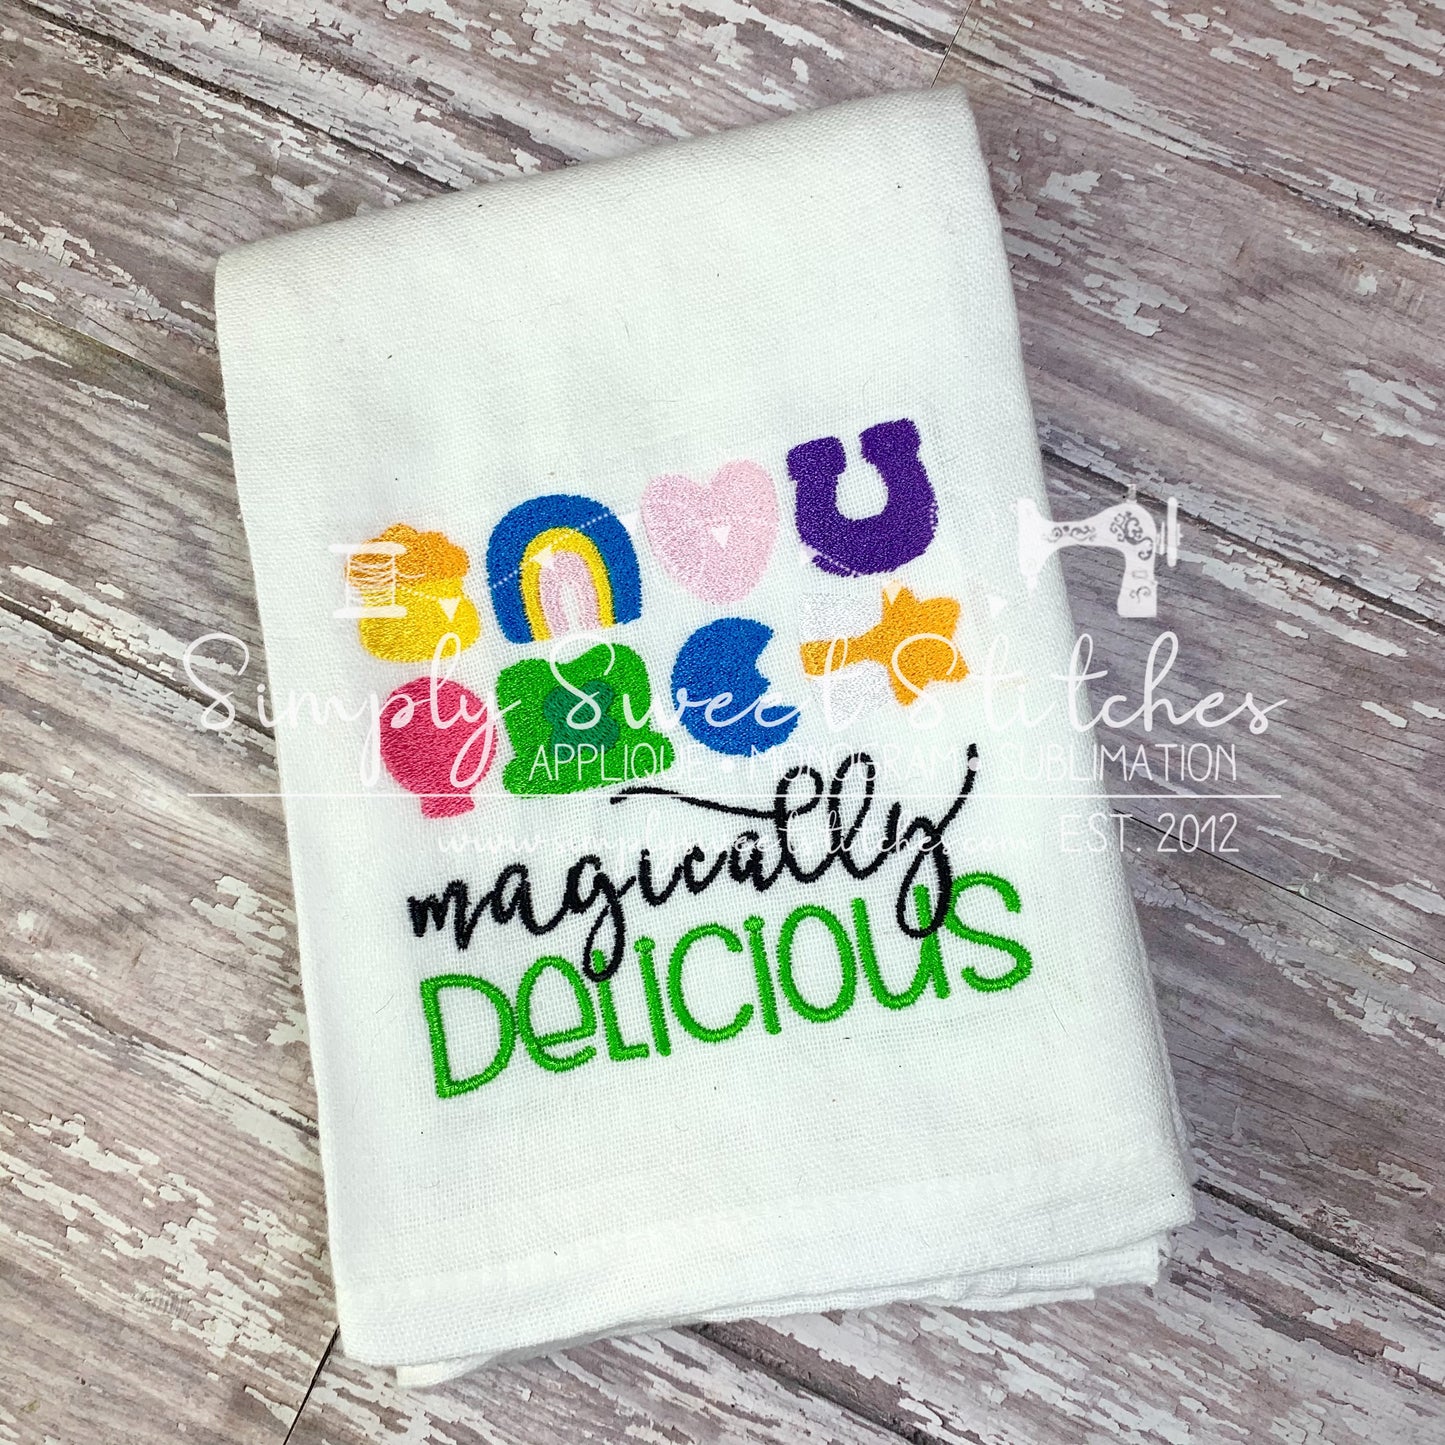 1588 - ST PATRICK'S DAY LUCKY CHARMS -  EMBROIDERY KITCHEN TOWEL